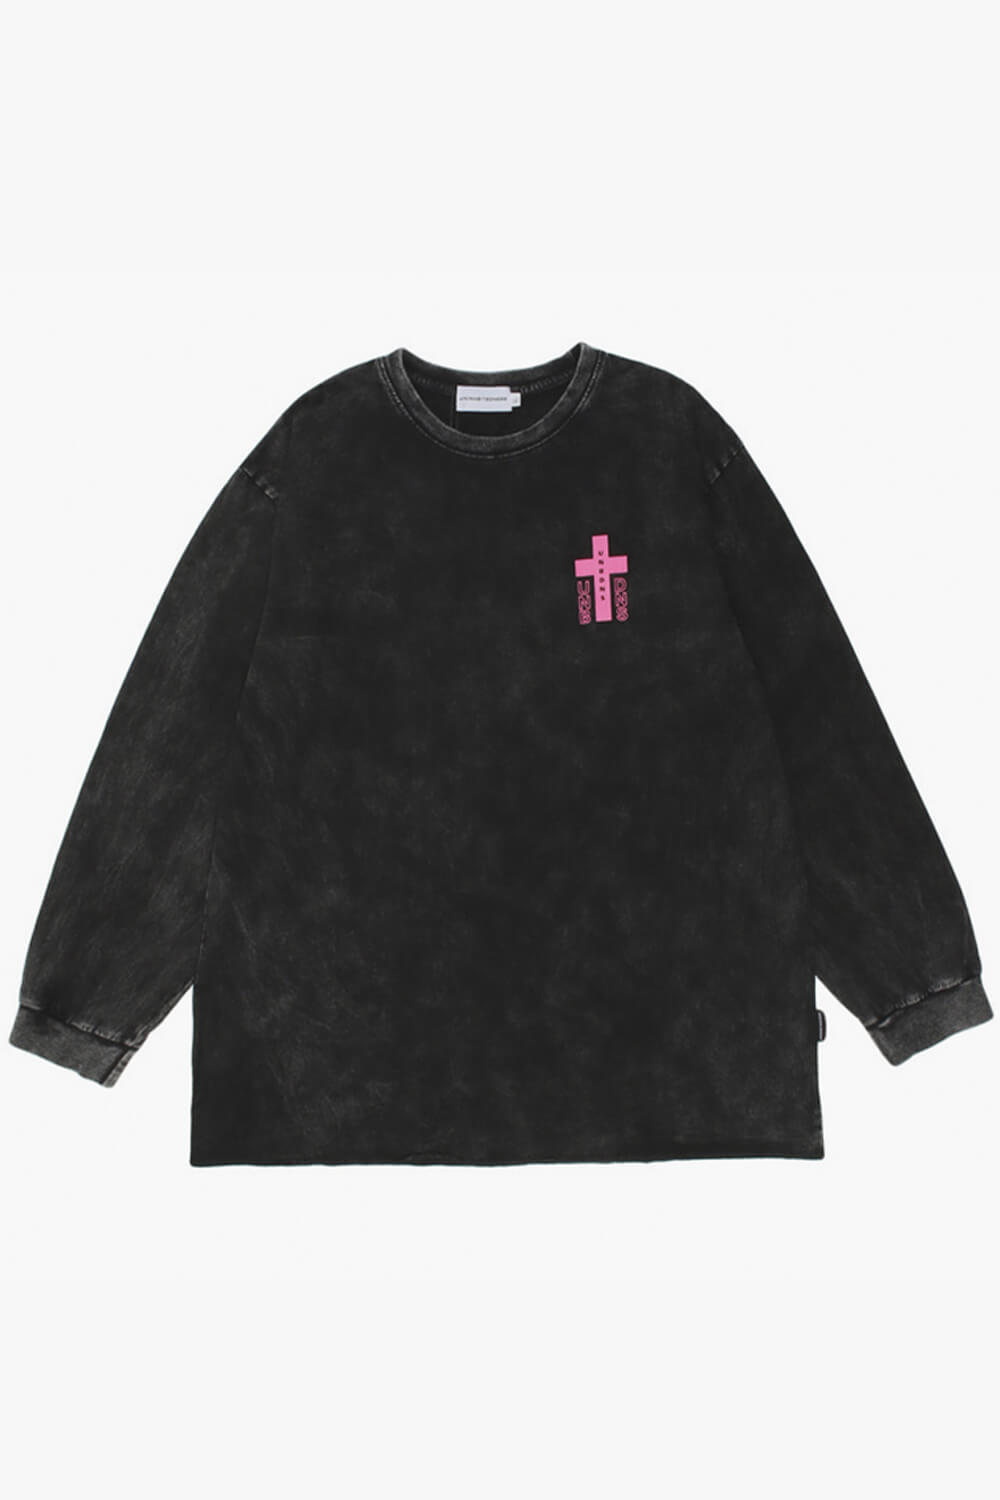 Crosses and Pink Entities Long Sleeve Shirt